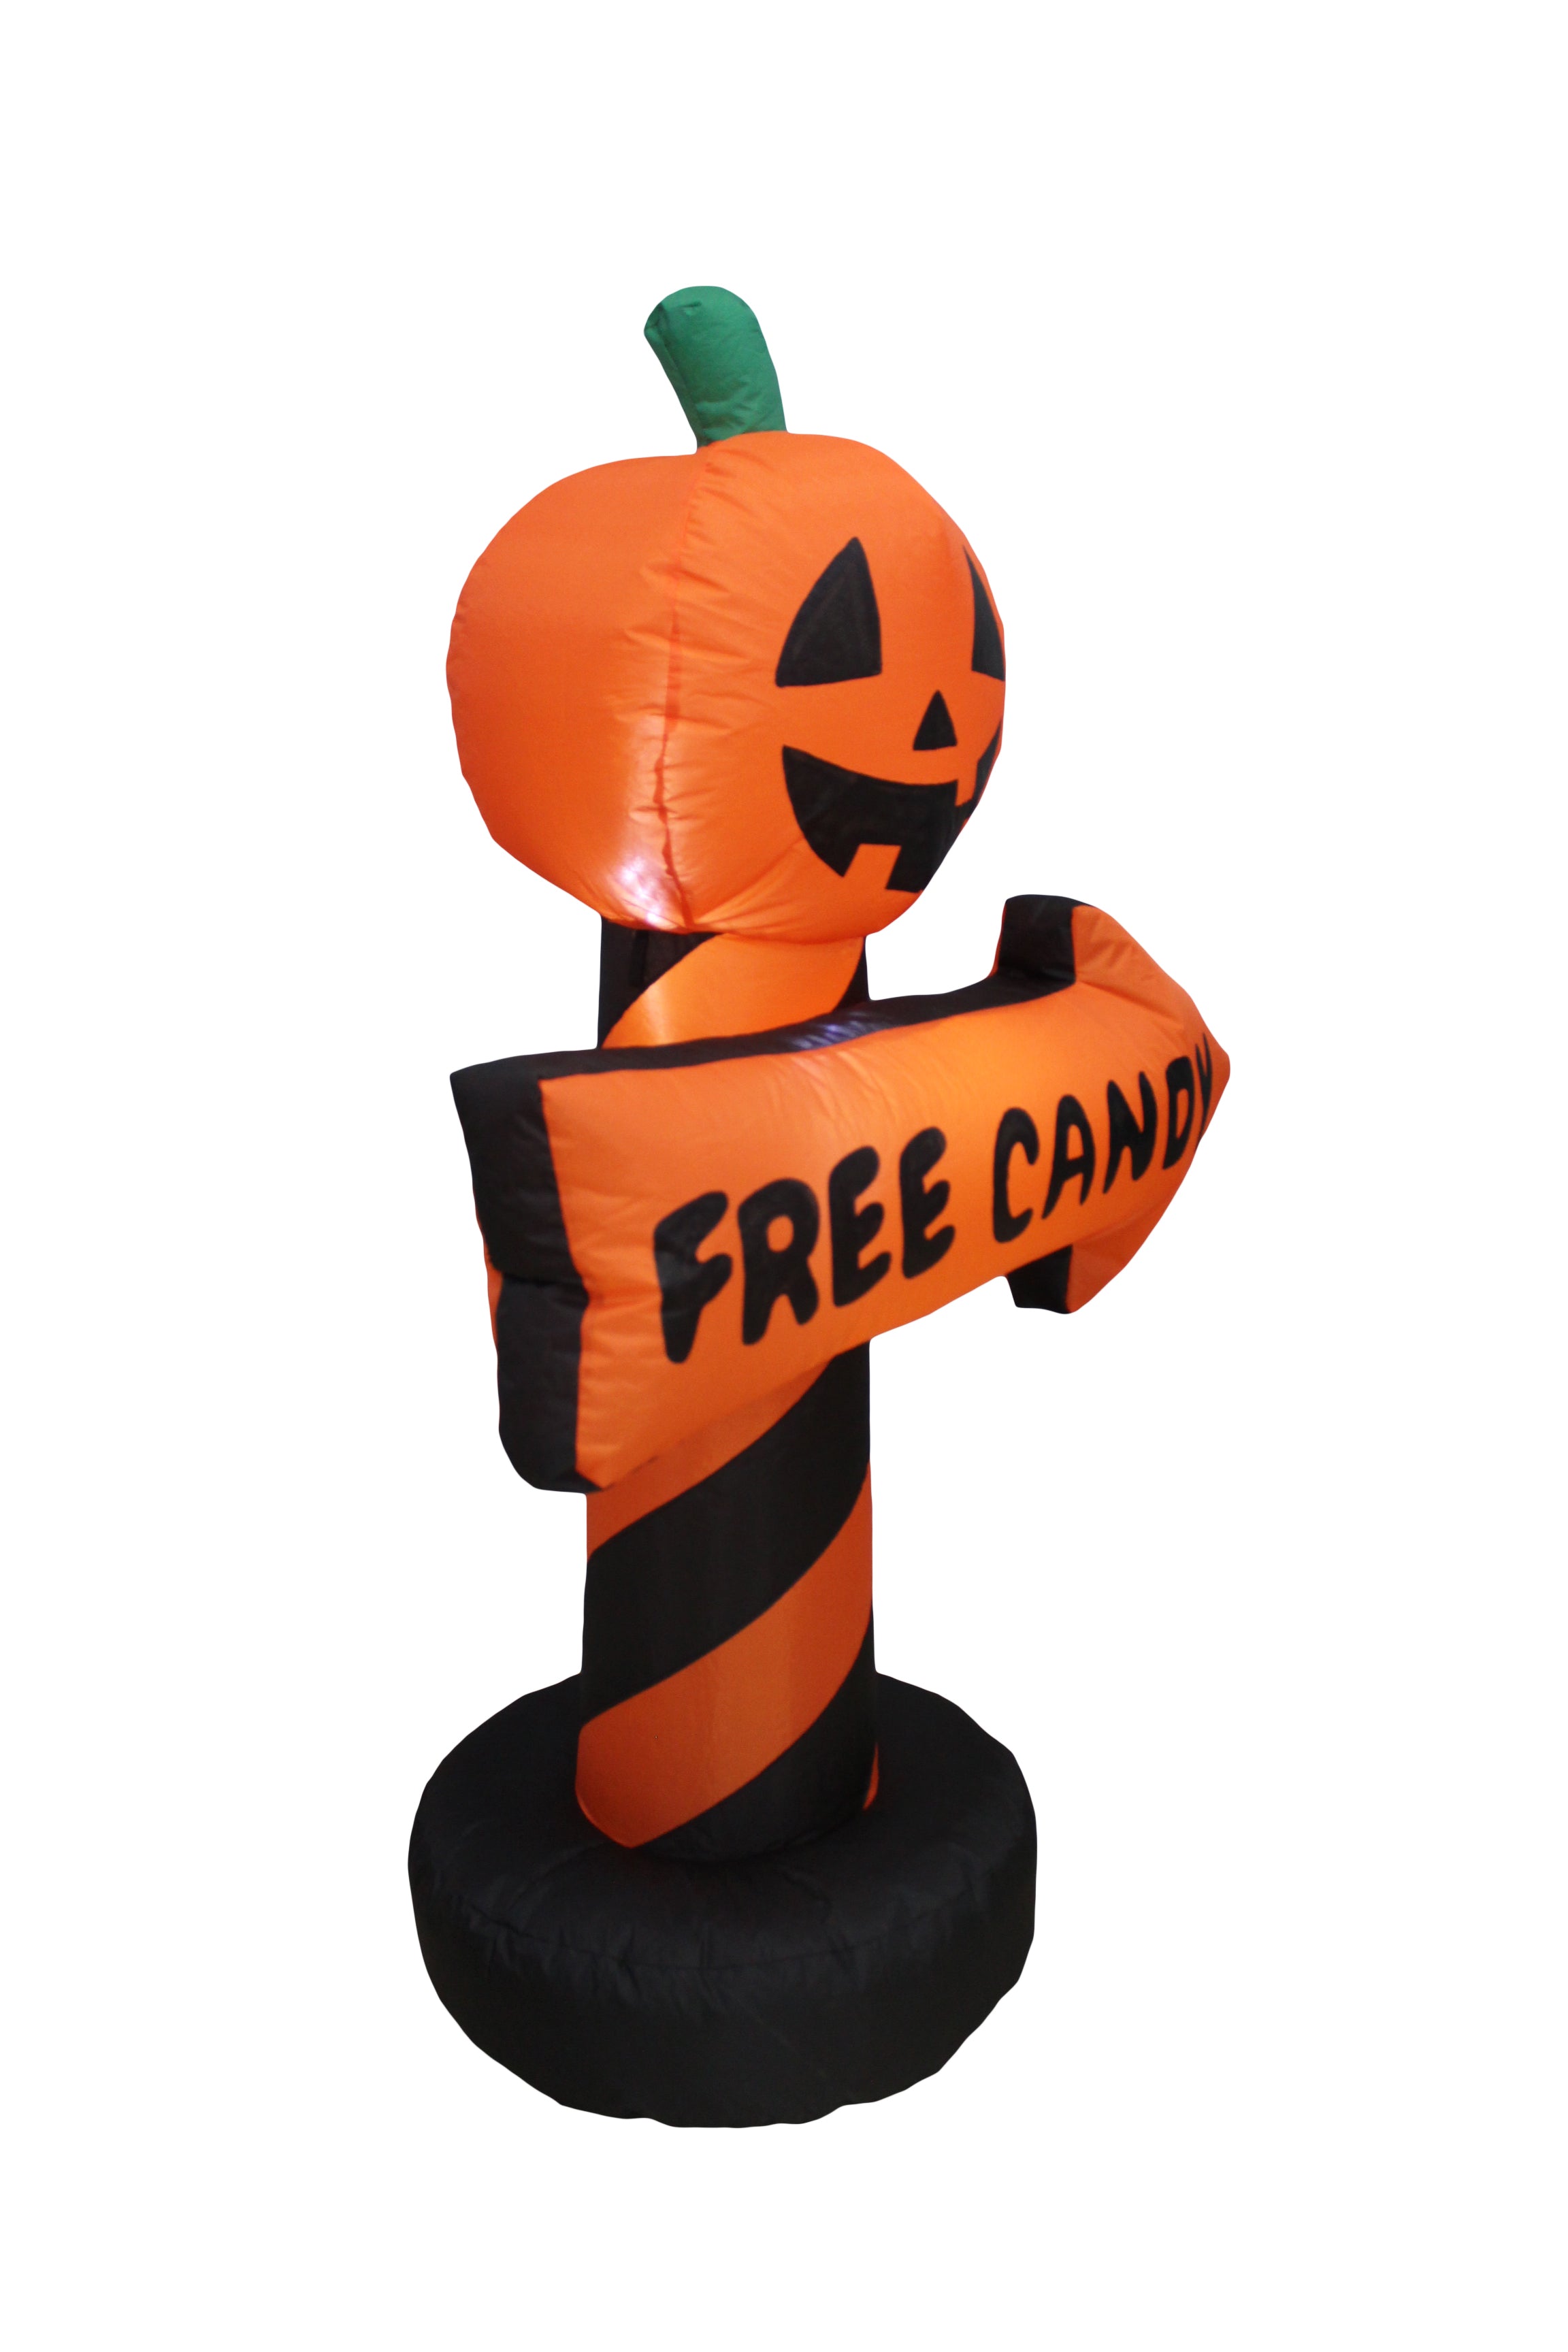 A Holiday Company 4ft Inflatable Pumpkin Guide, 4 ft Tall, Multi